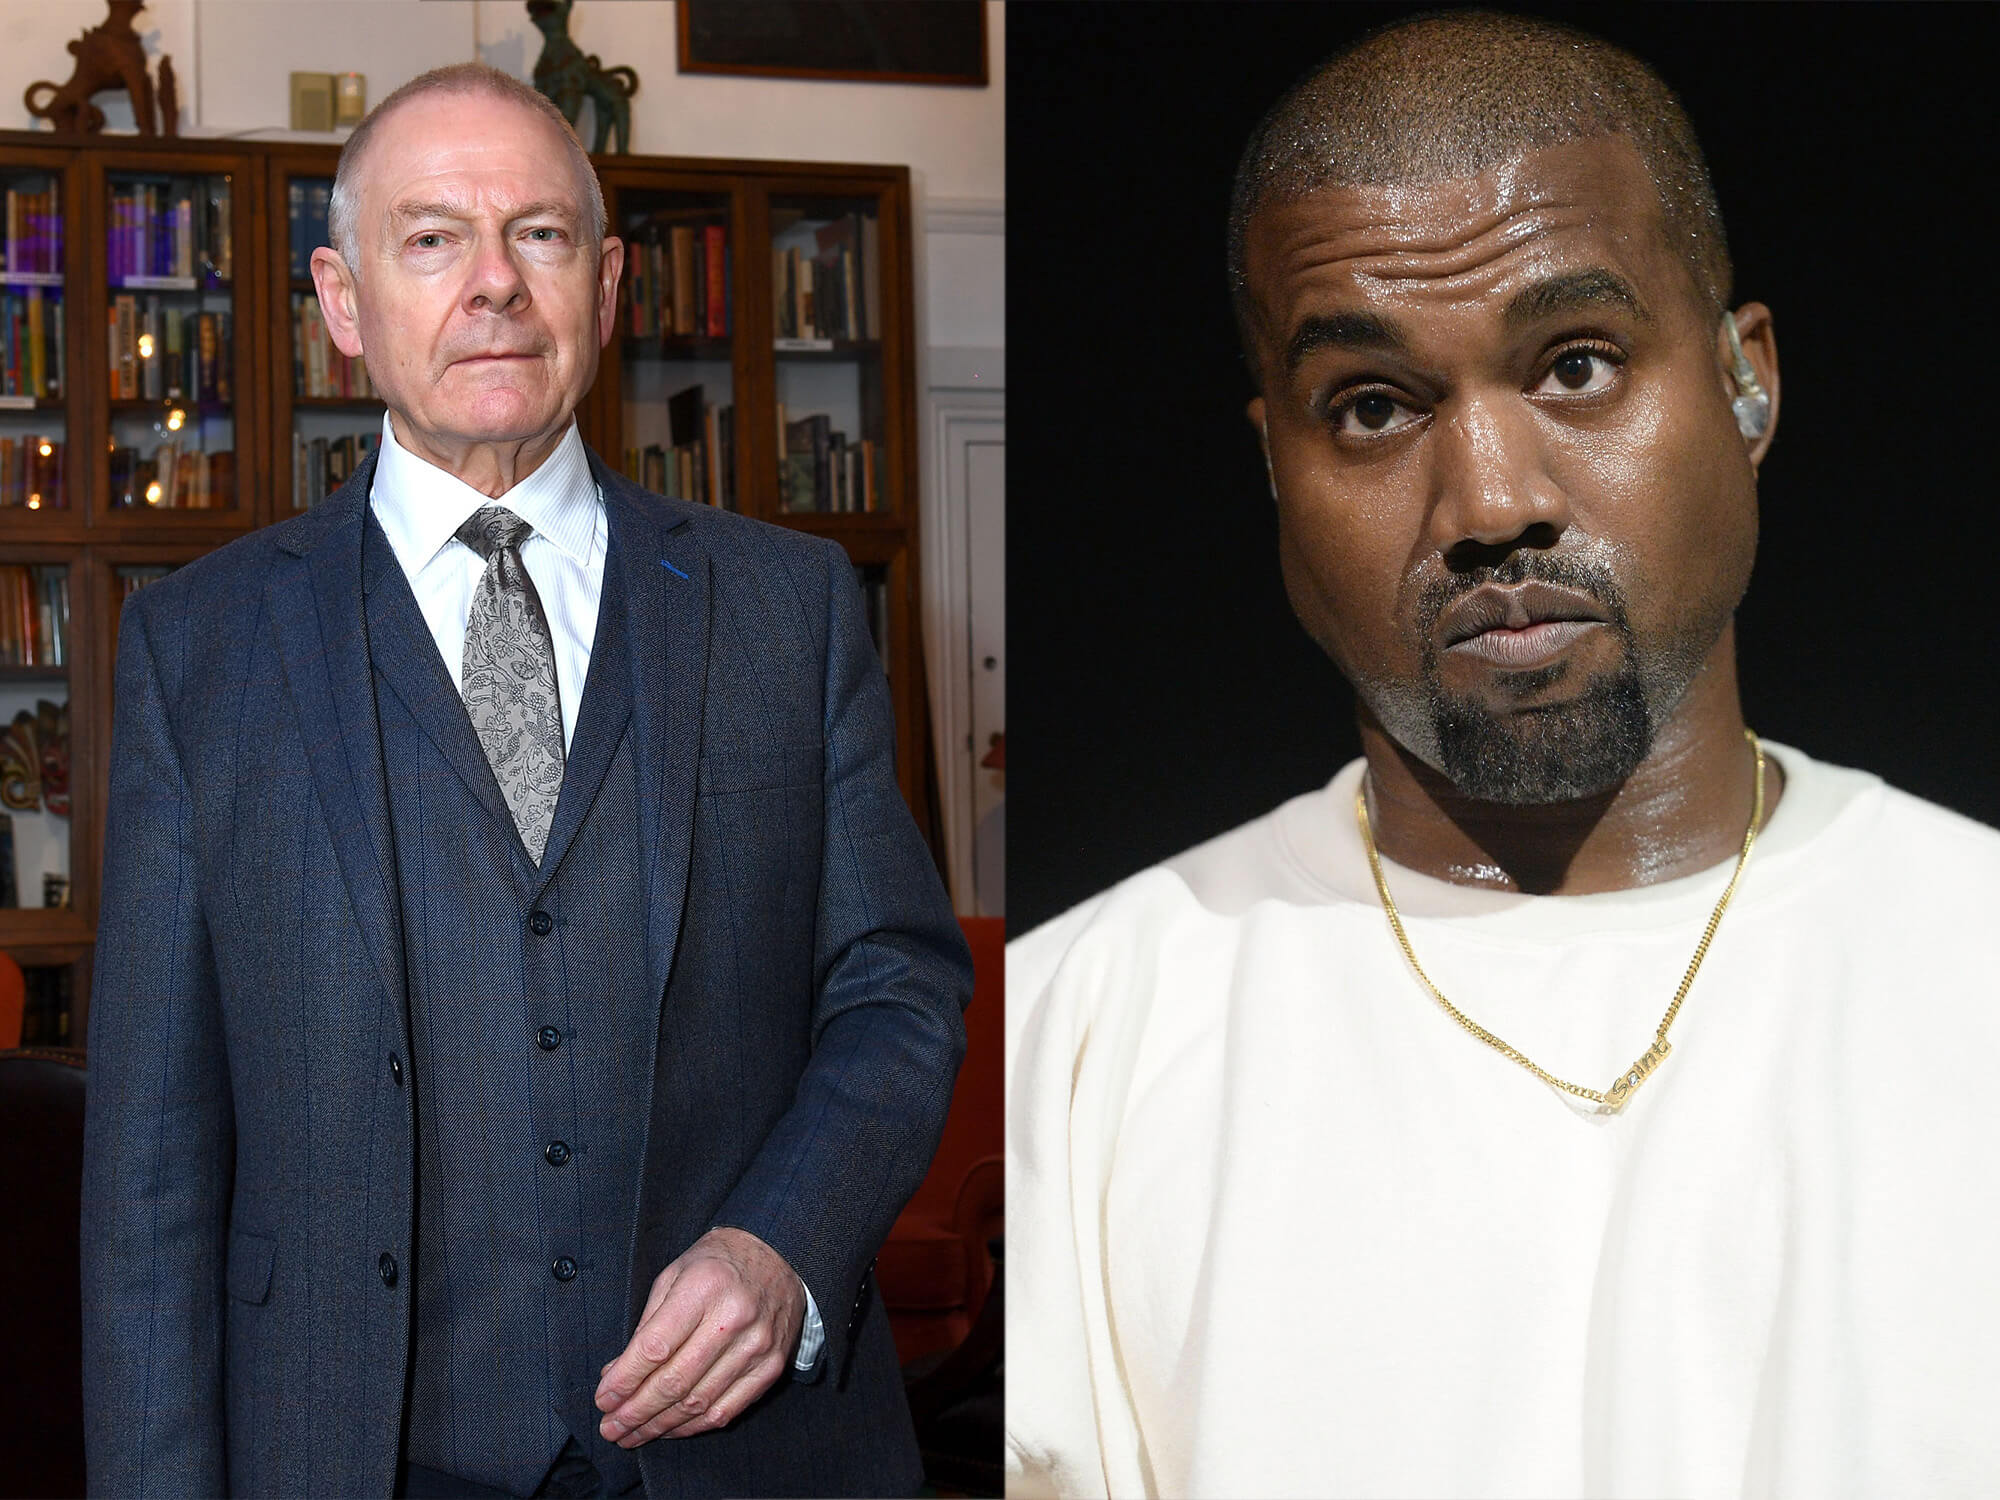 Robert Fripp and Kanye West